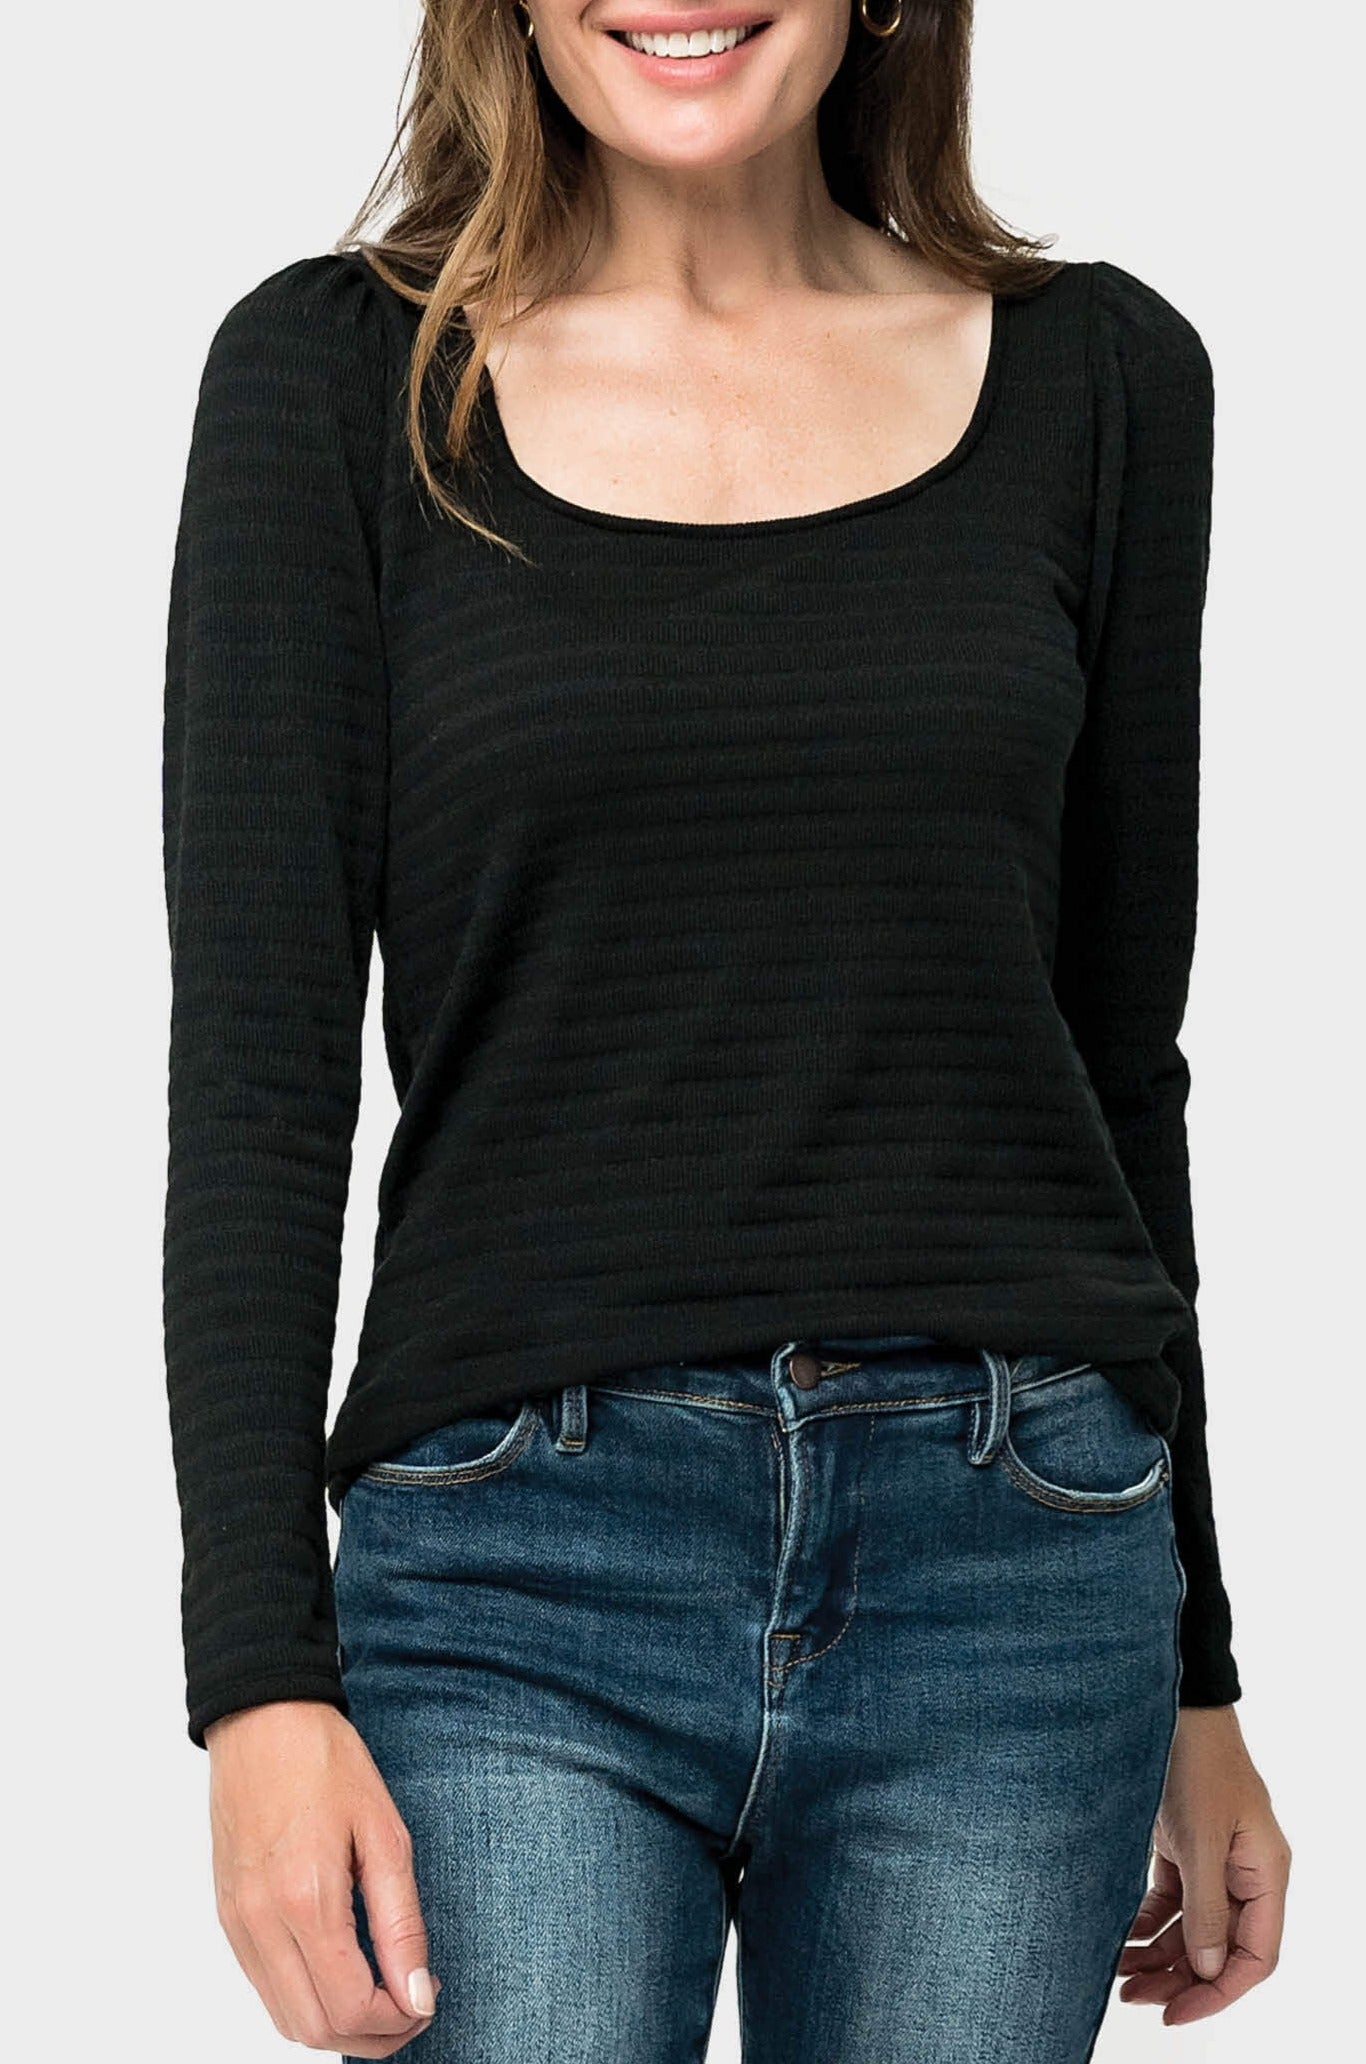 Juliette Square Neck Long Puff Sleeve Ribbed Tee - Black XS